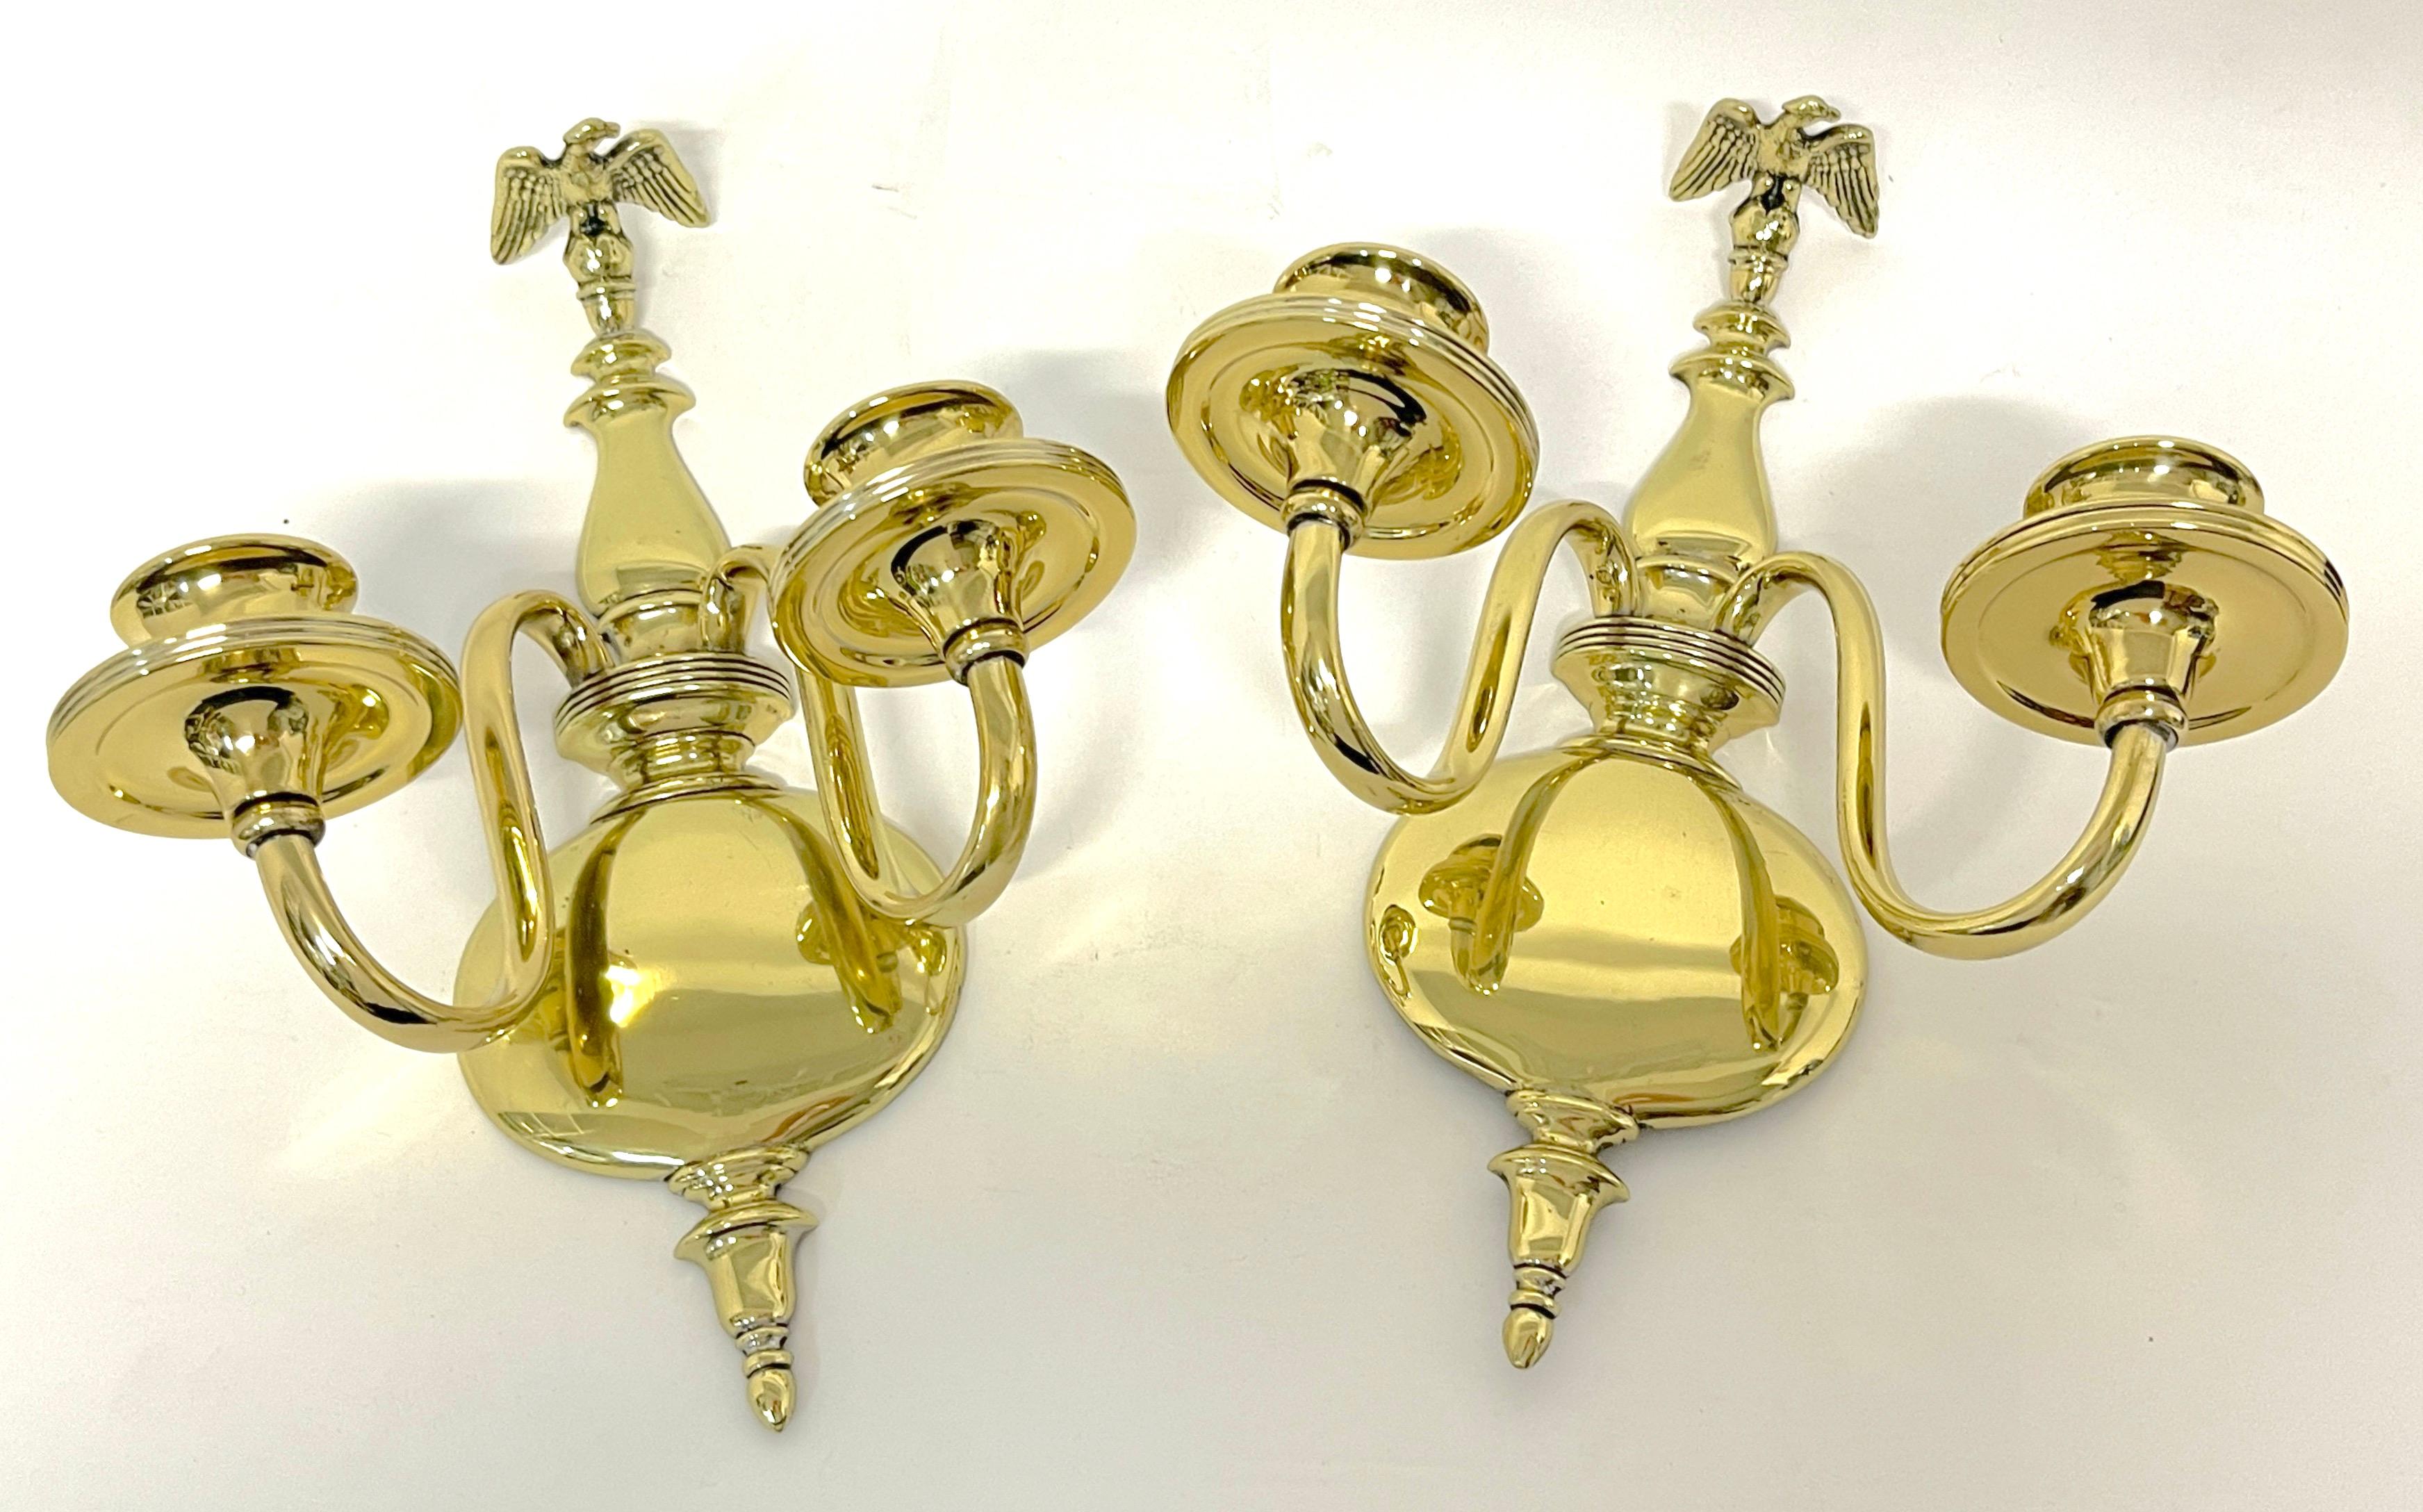 Pair 19th century English Regency brass eagle two-light candle wall sconces 
England, Regency Revival Mid-19th Century or older

Each one well cast with a perched eagle atop, supported by an undulating urn and ball backrest, with two graceful